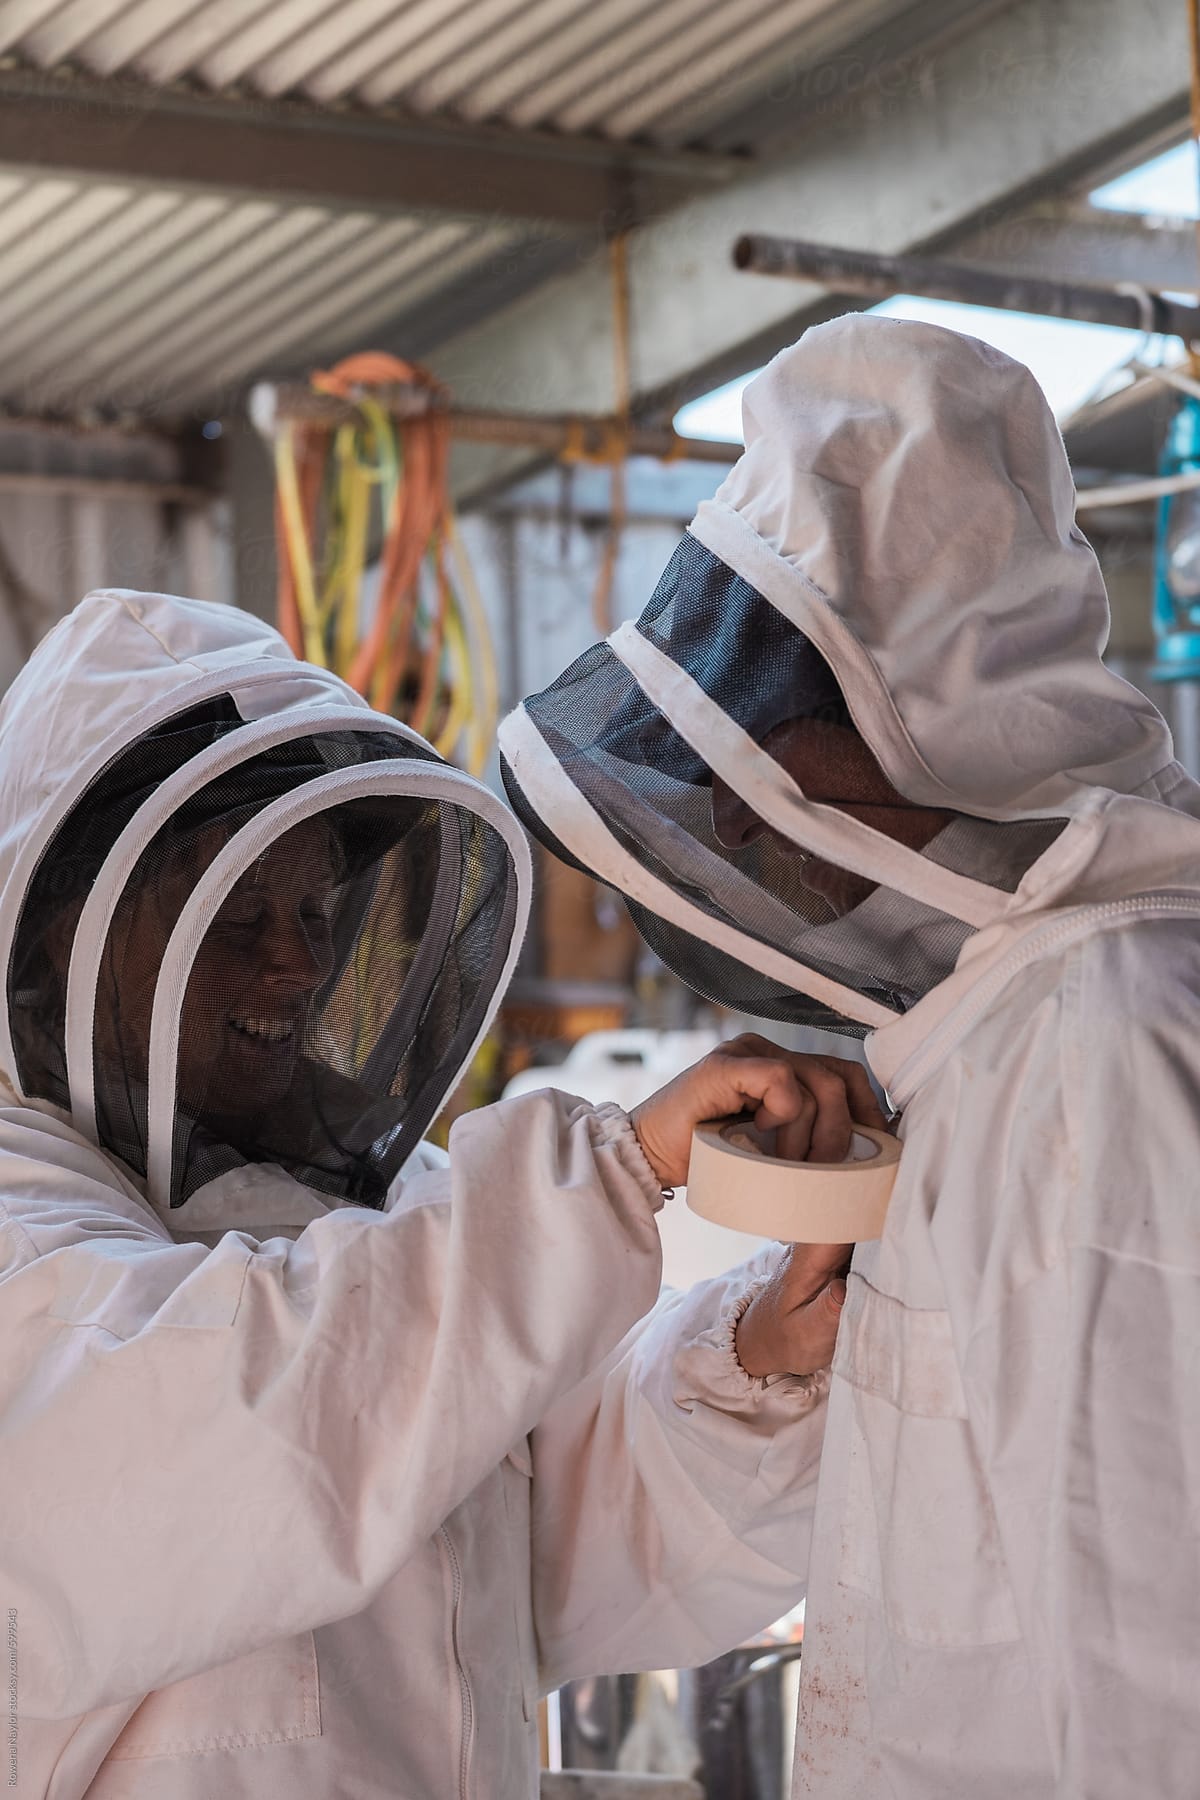 Two Bee Keepers preparing to harvest honey from Bee hives